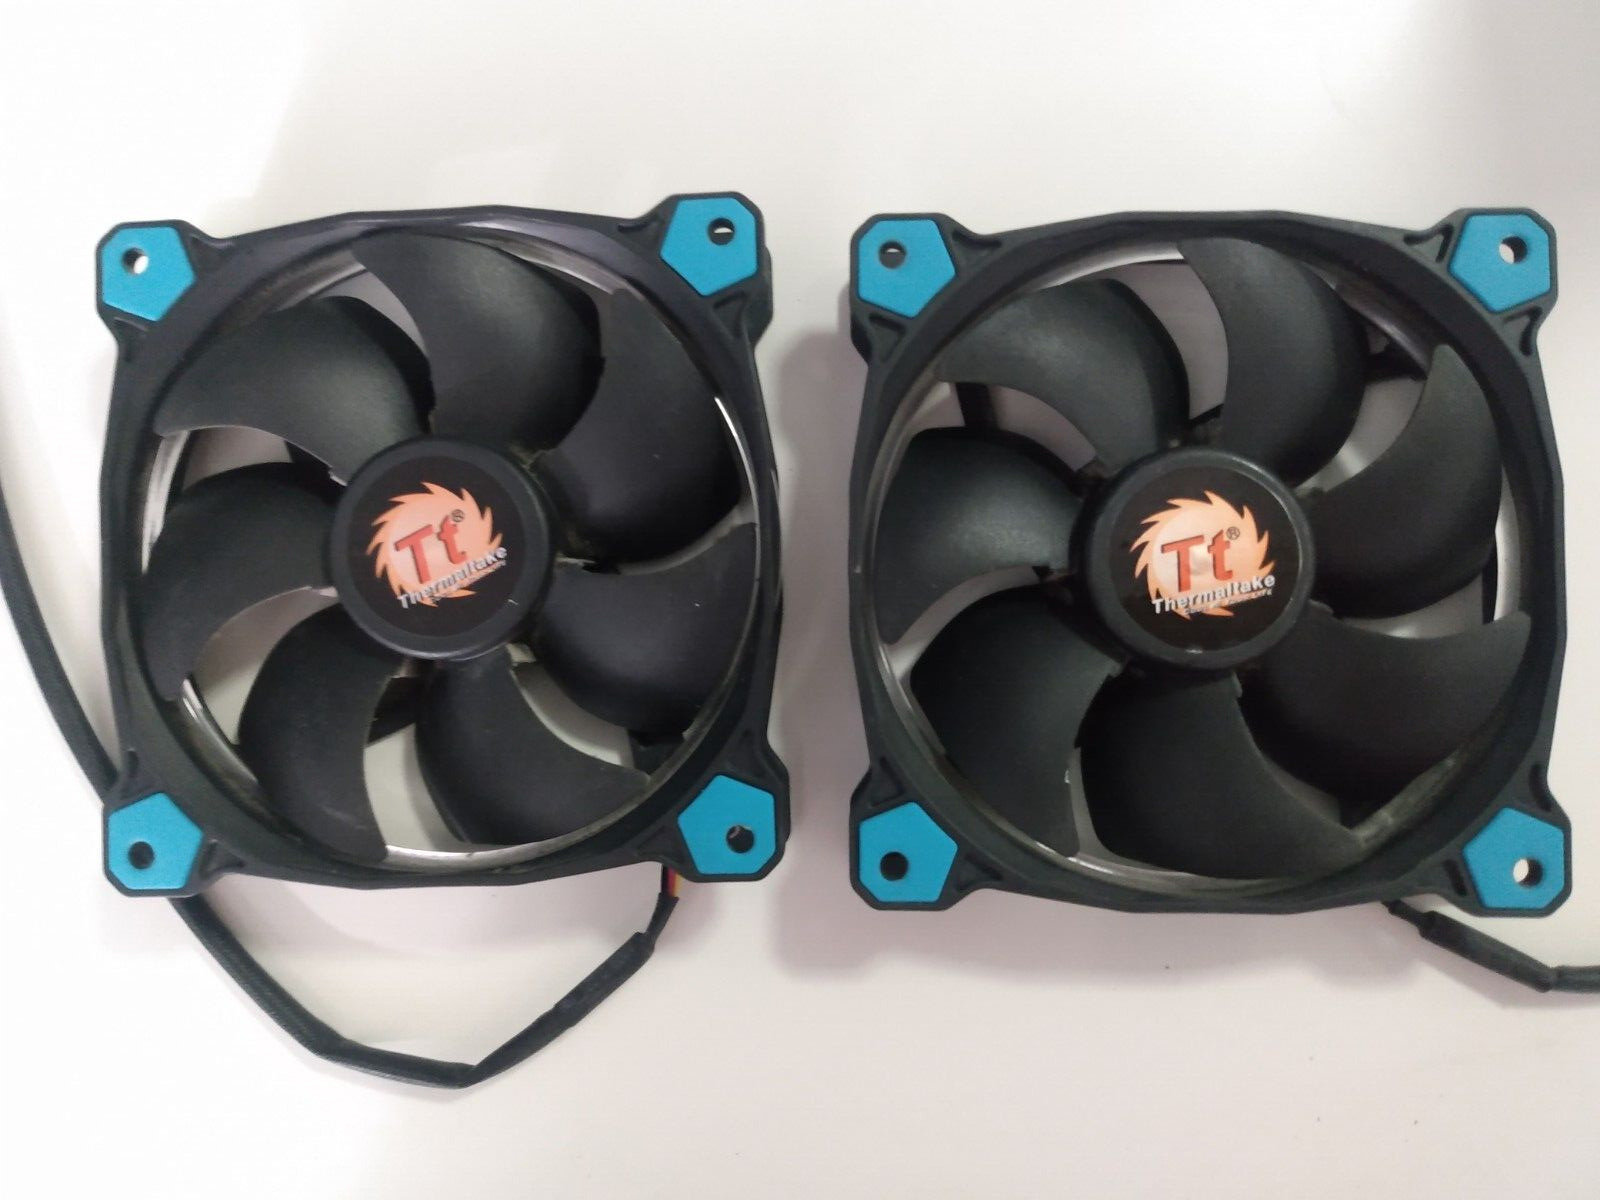 Thermaltake Riing 12 blue LED fans (set of two) used